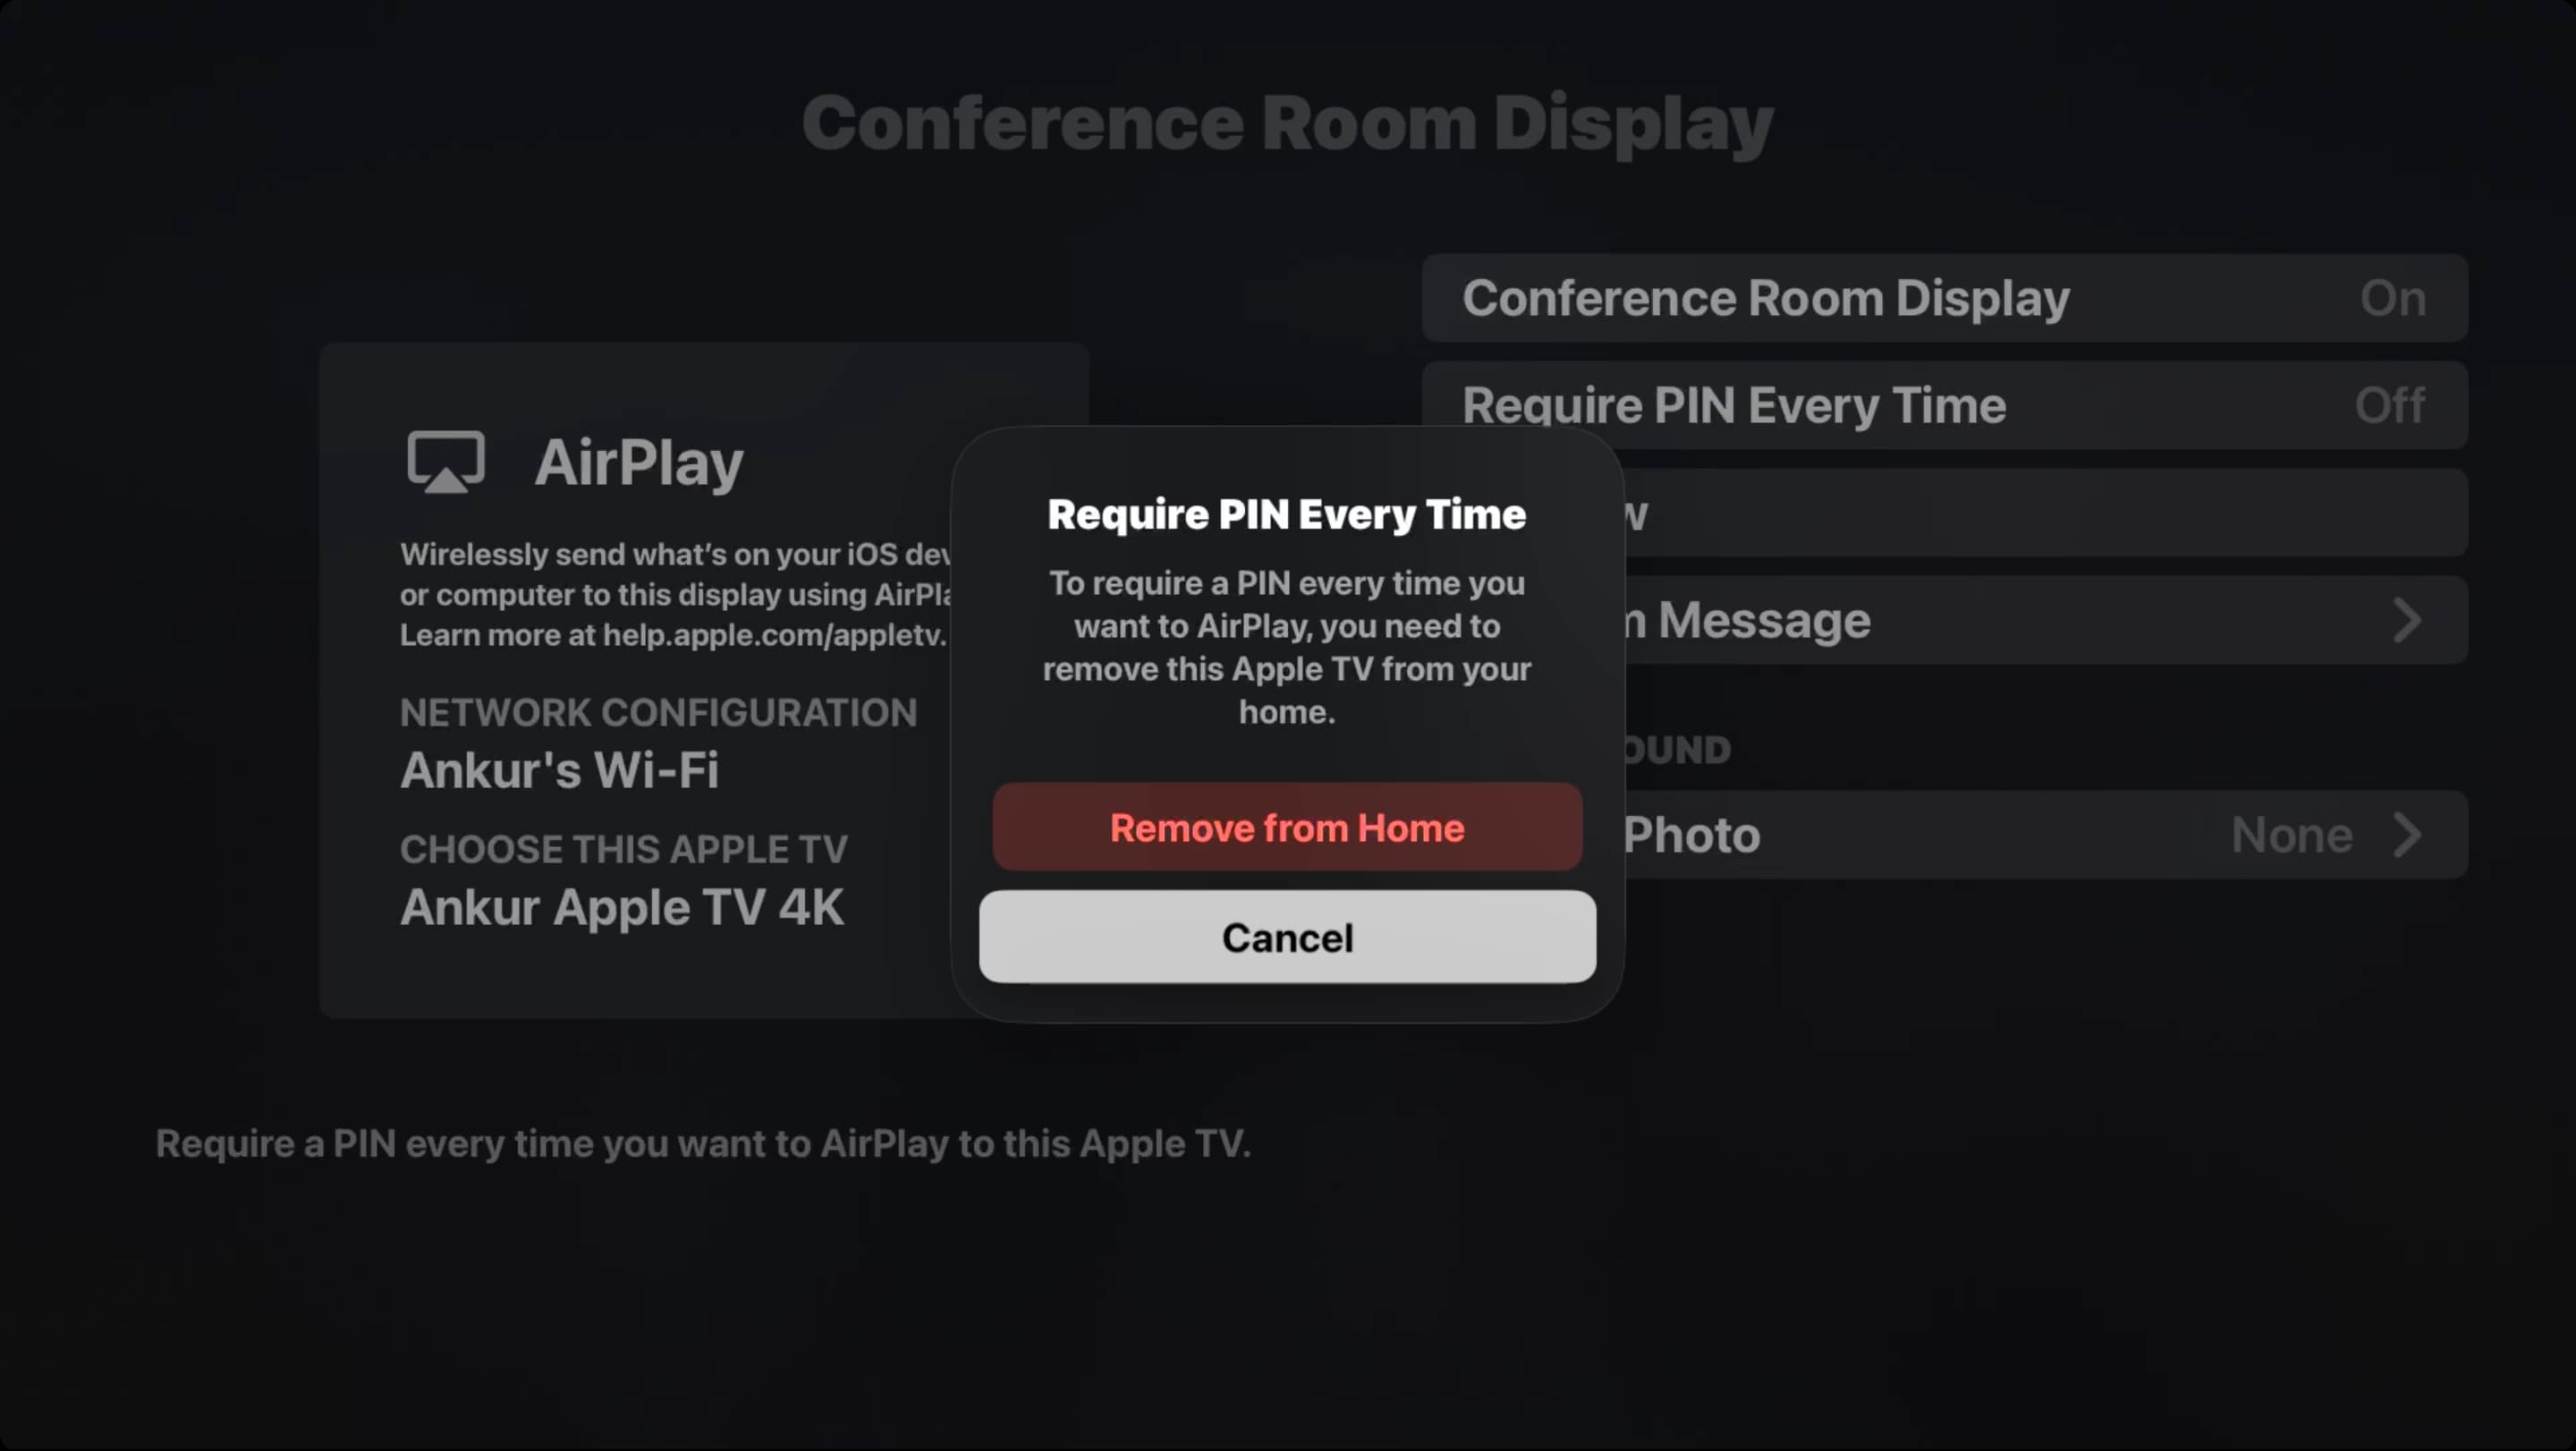 Remove from Home prompt in Conference Room Display on Apple TV